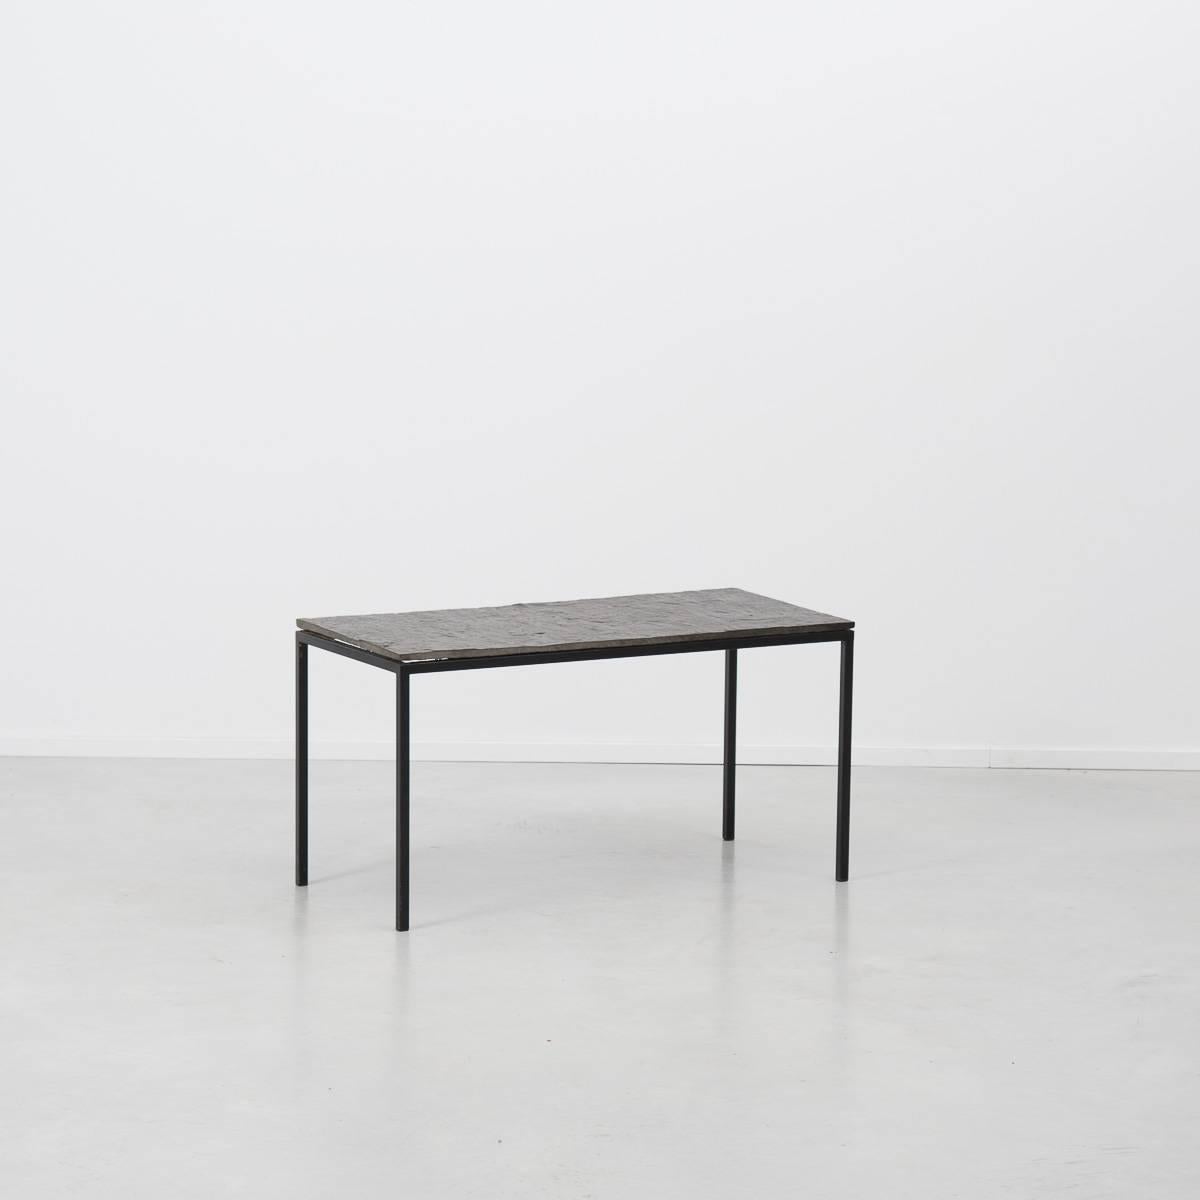 Minimalist slate and steel side table or small coffee table designed by Floris Fiedeldij for Artimeta Soest, Holland in the 1960s. A dark slate top sits atop a black steel frame. The table is in excellent vintage condition.

Artimeta also produced